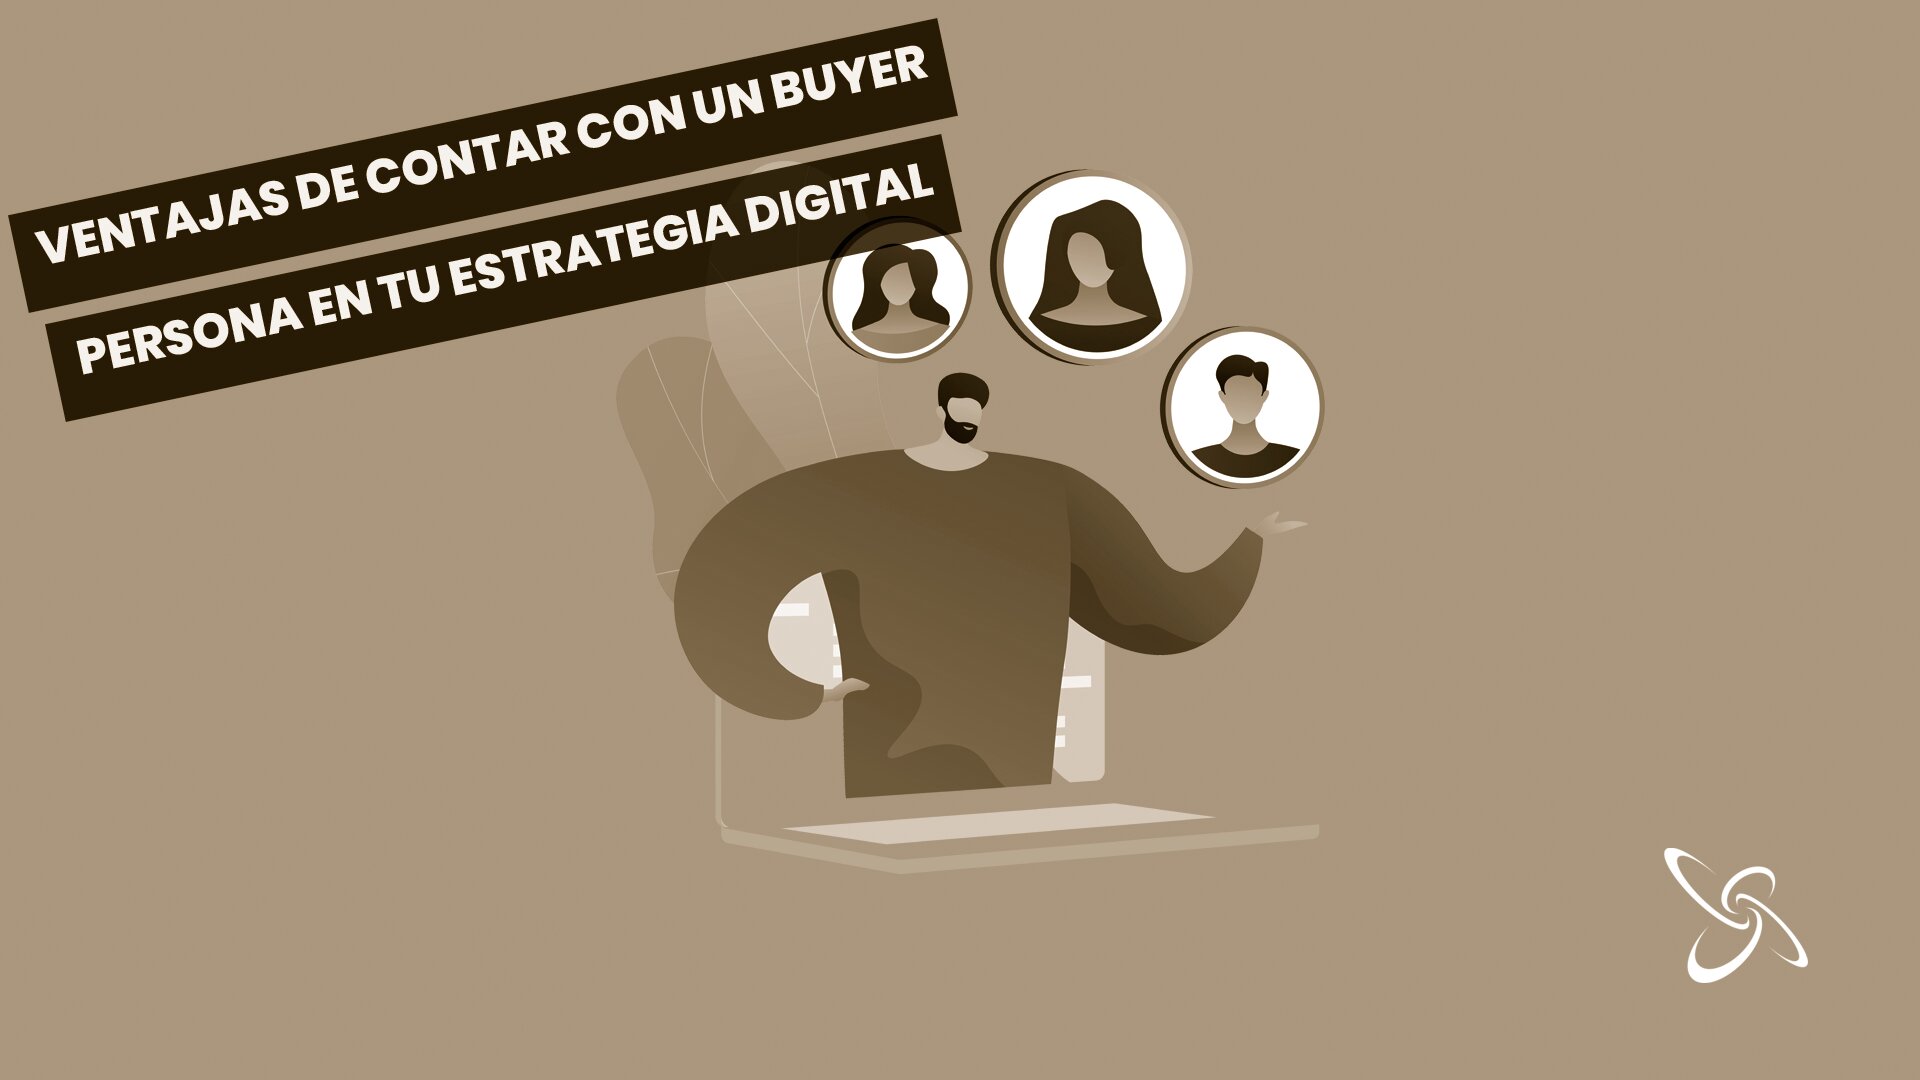 Advantages of having a buyer persona in your digital strategy